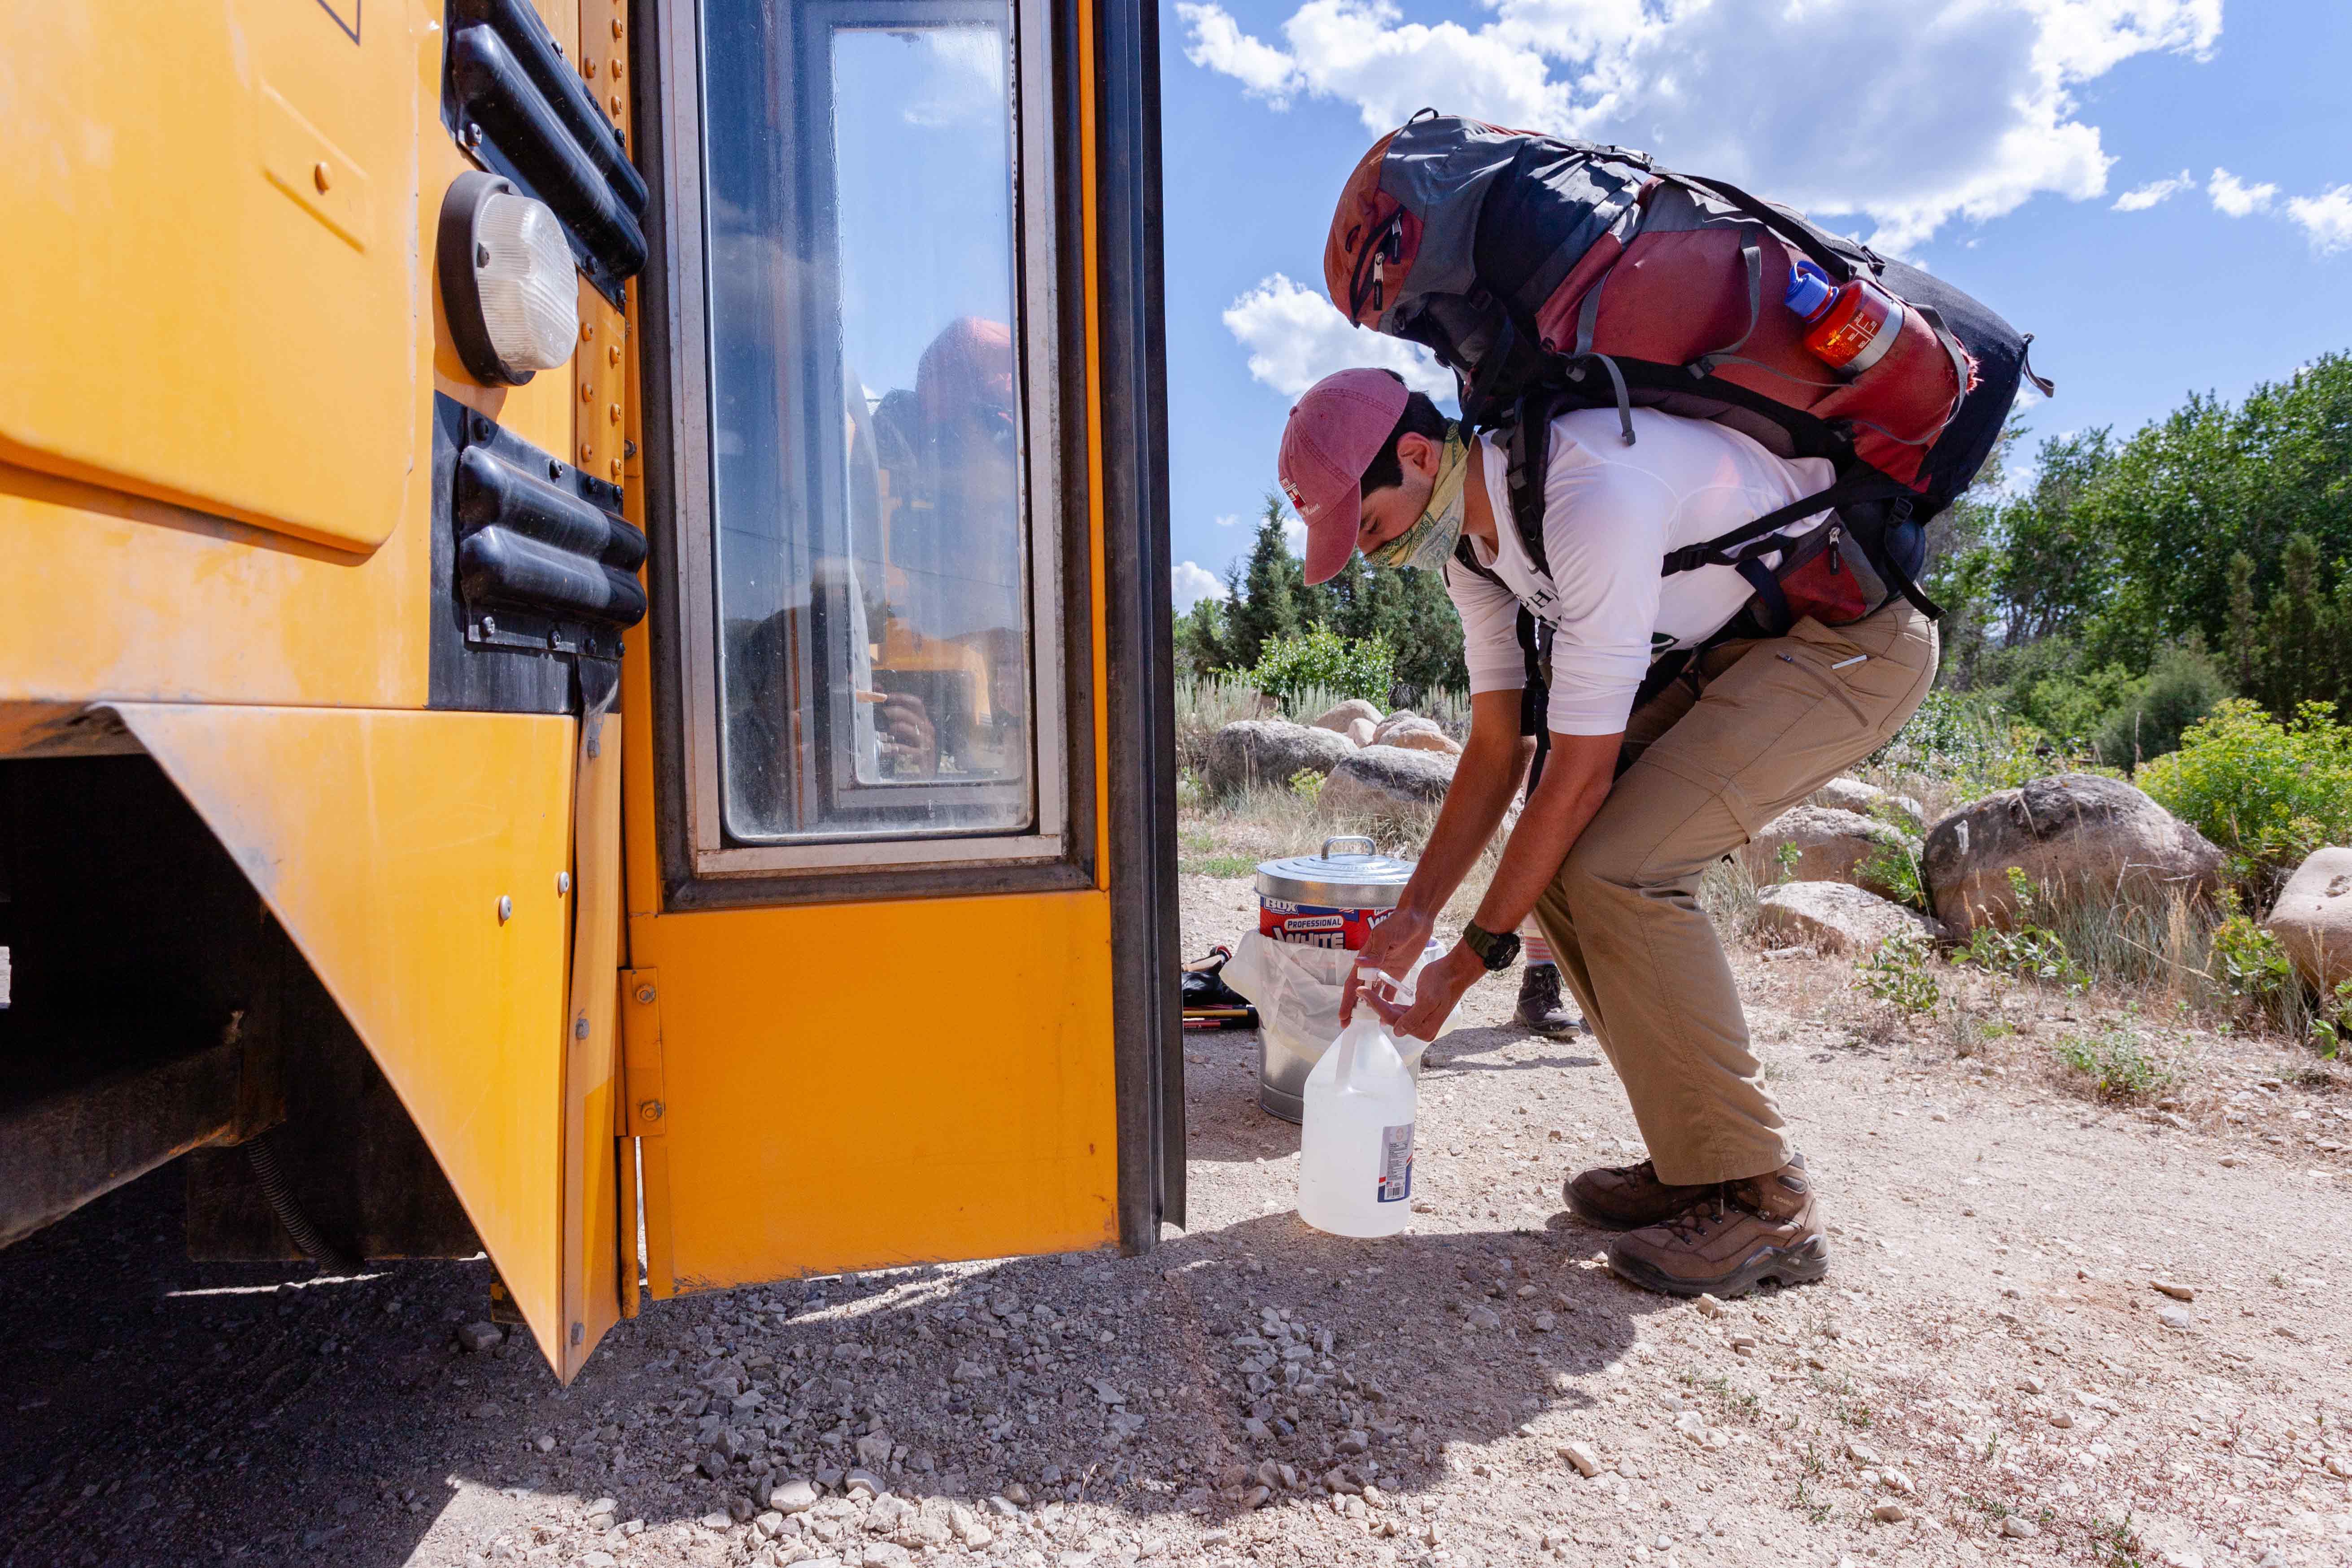 A student wearing a backpacking pack and face mask bends down to dispense some hand sanitizer before getting on a school bus.